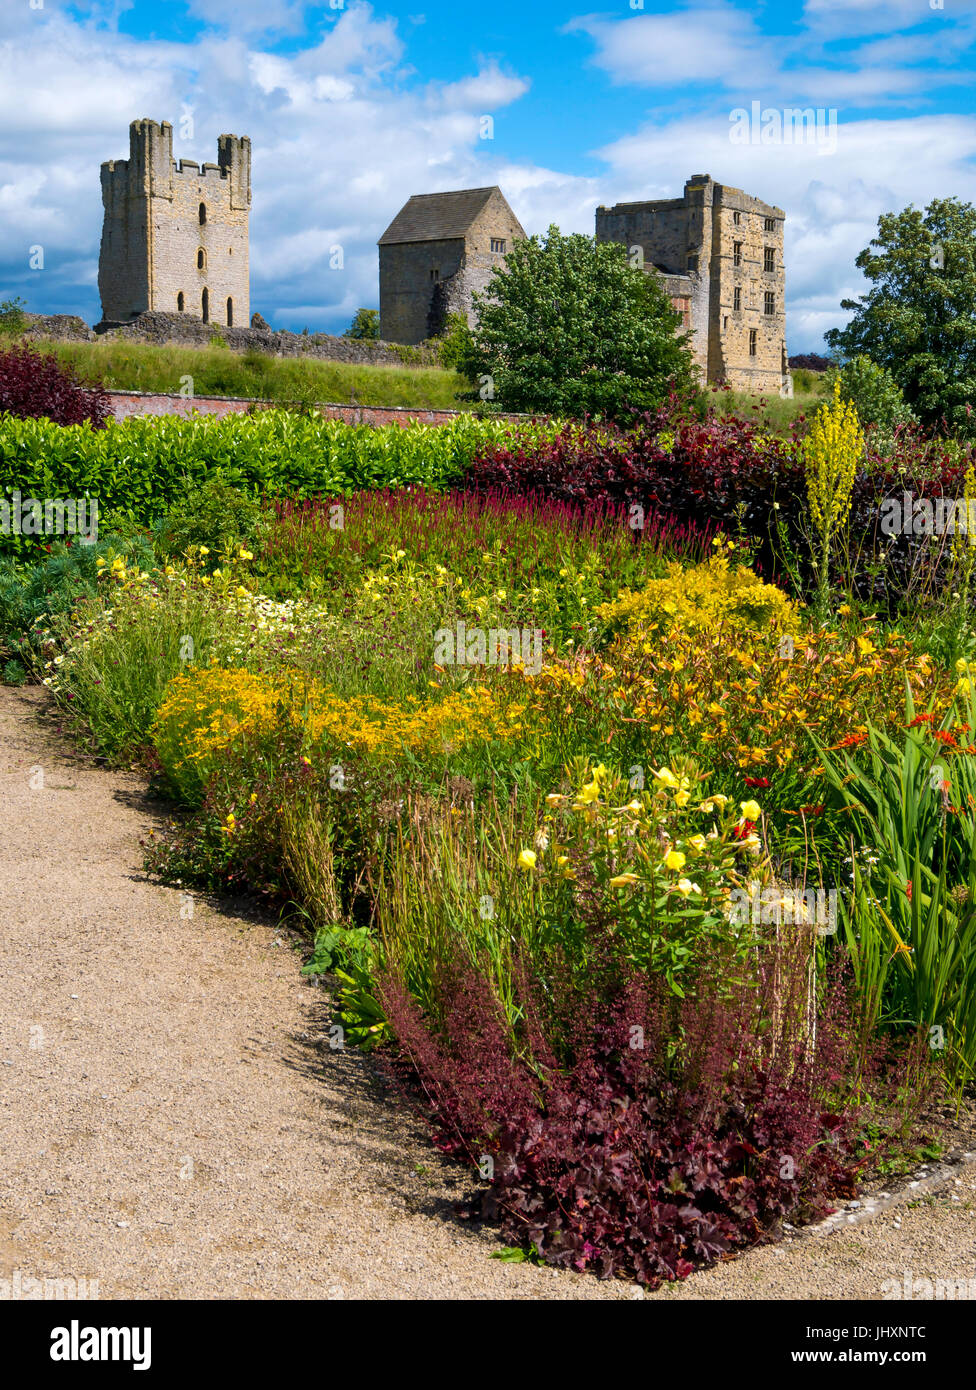 Helmsley Castle overlooking the Helmsley Walled Garden with a show of summer flowers Stock Photo